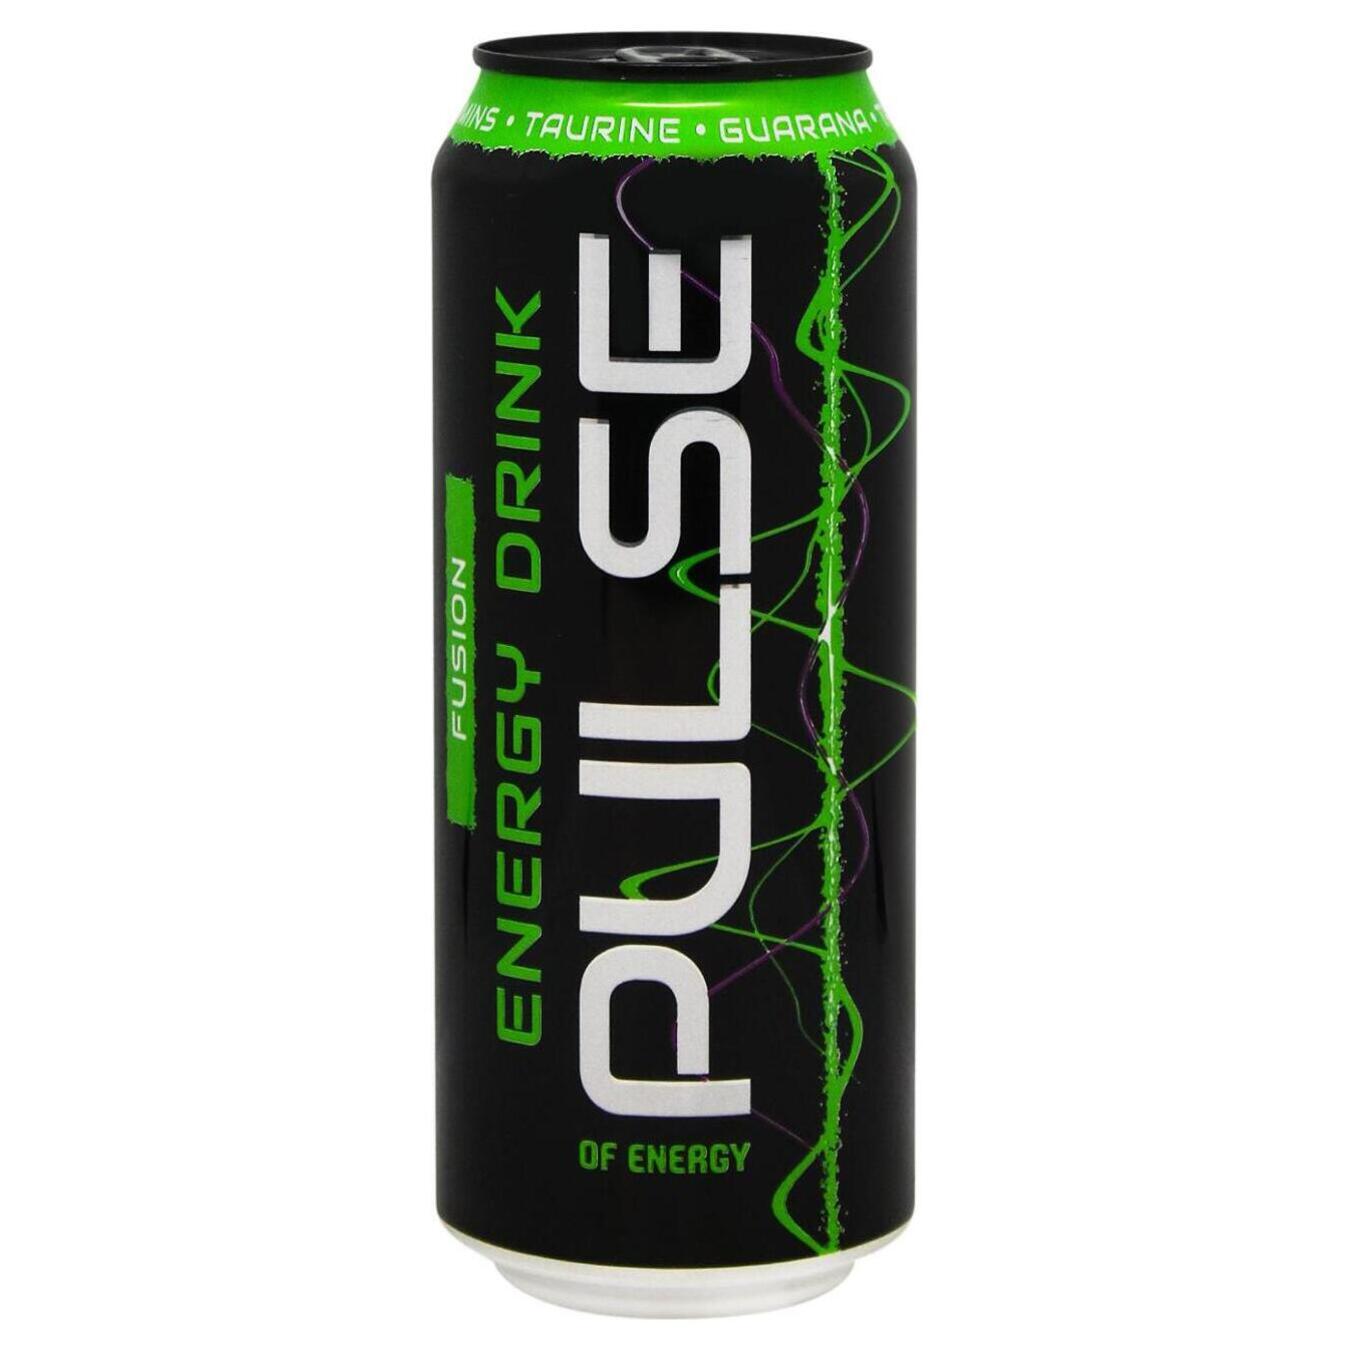 Energy drink Pulse Fusion 0.5 l iron can